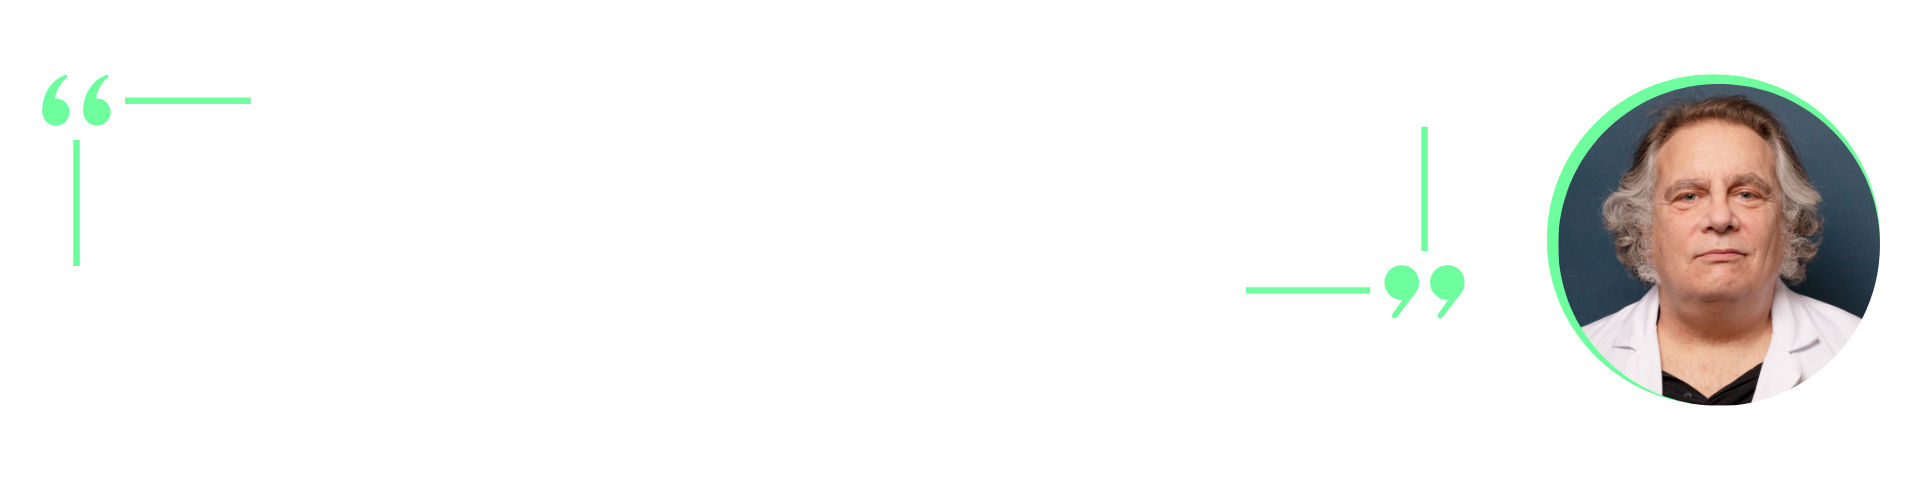 Doctor Michel Piotin's quotation: “I will select the first branch as the inferior branch because the angulation is more pronounced”